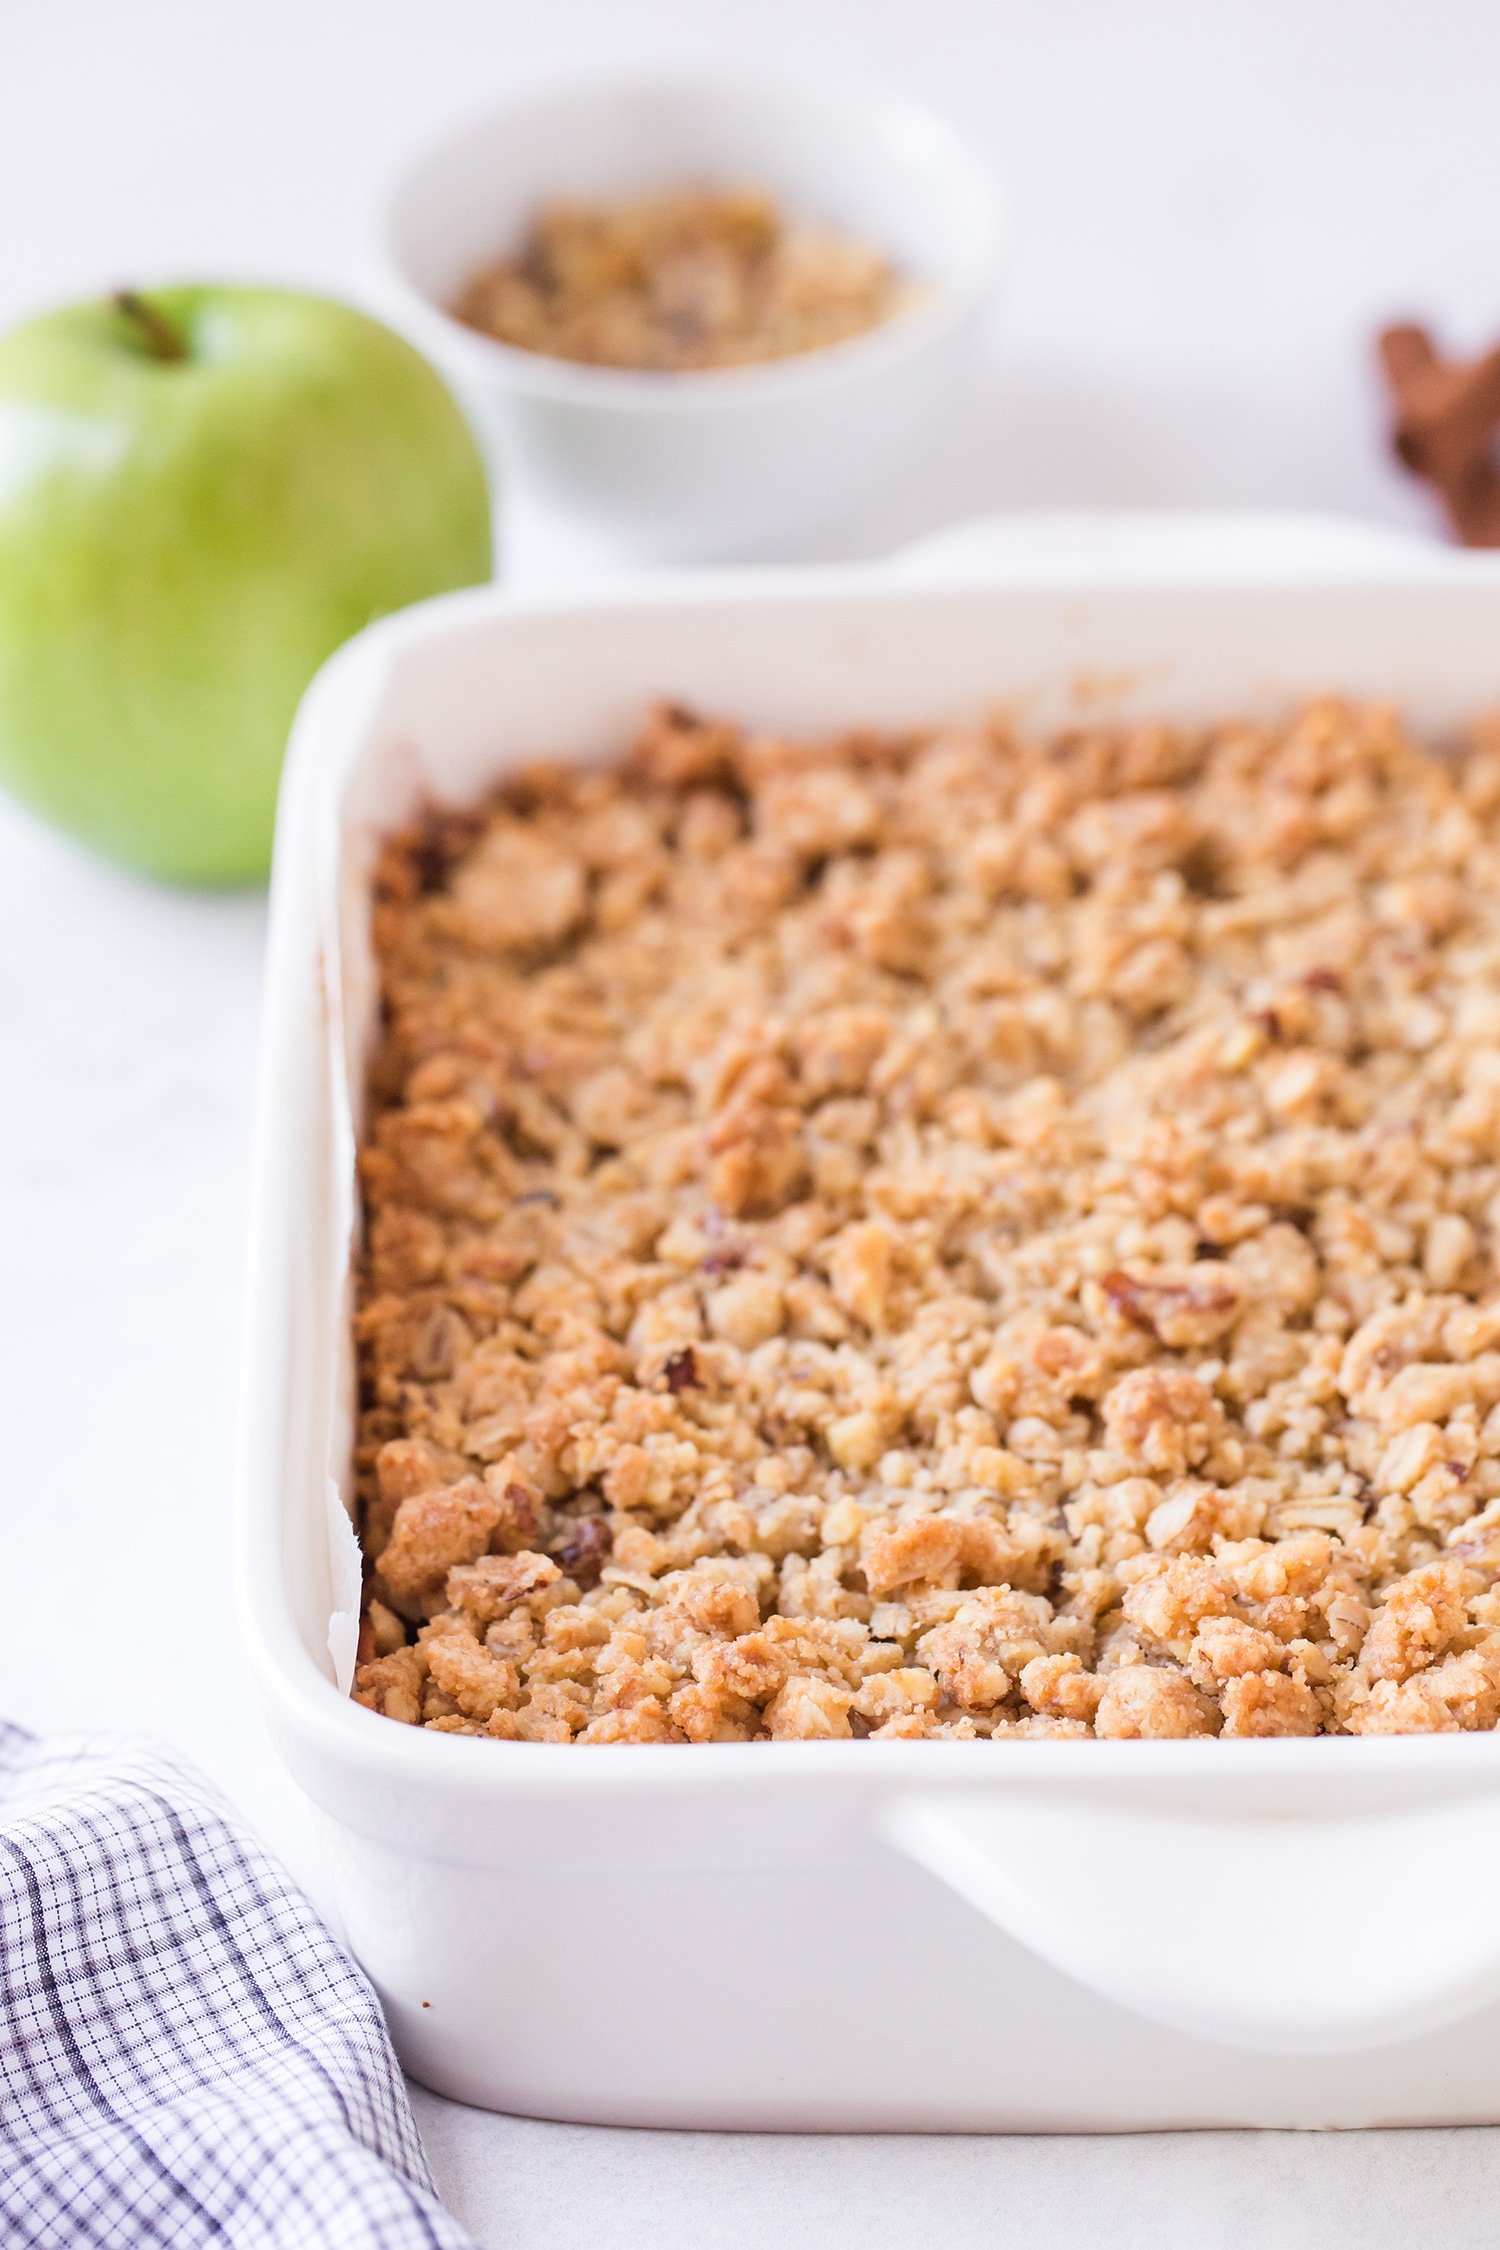 Apple pie bars in white baking dish with green apples in background